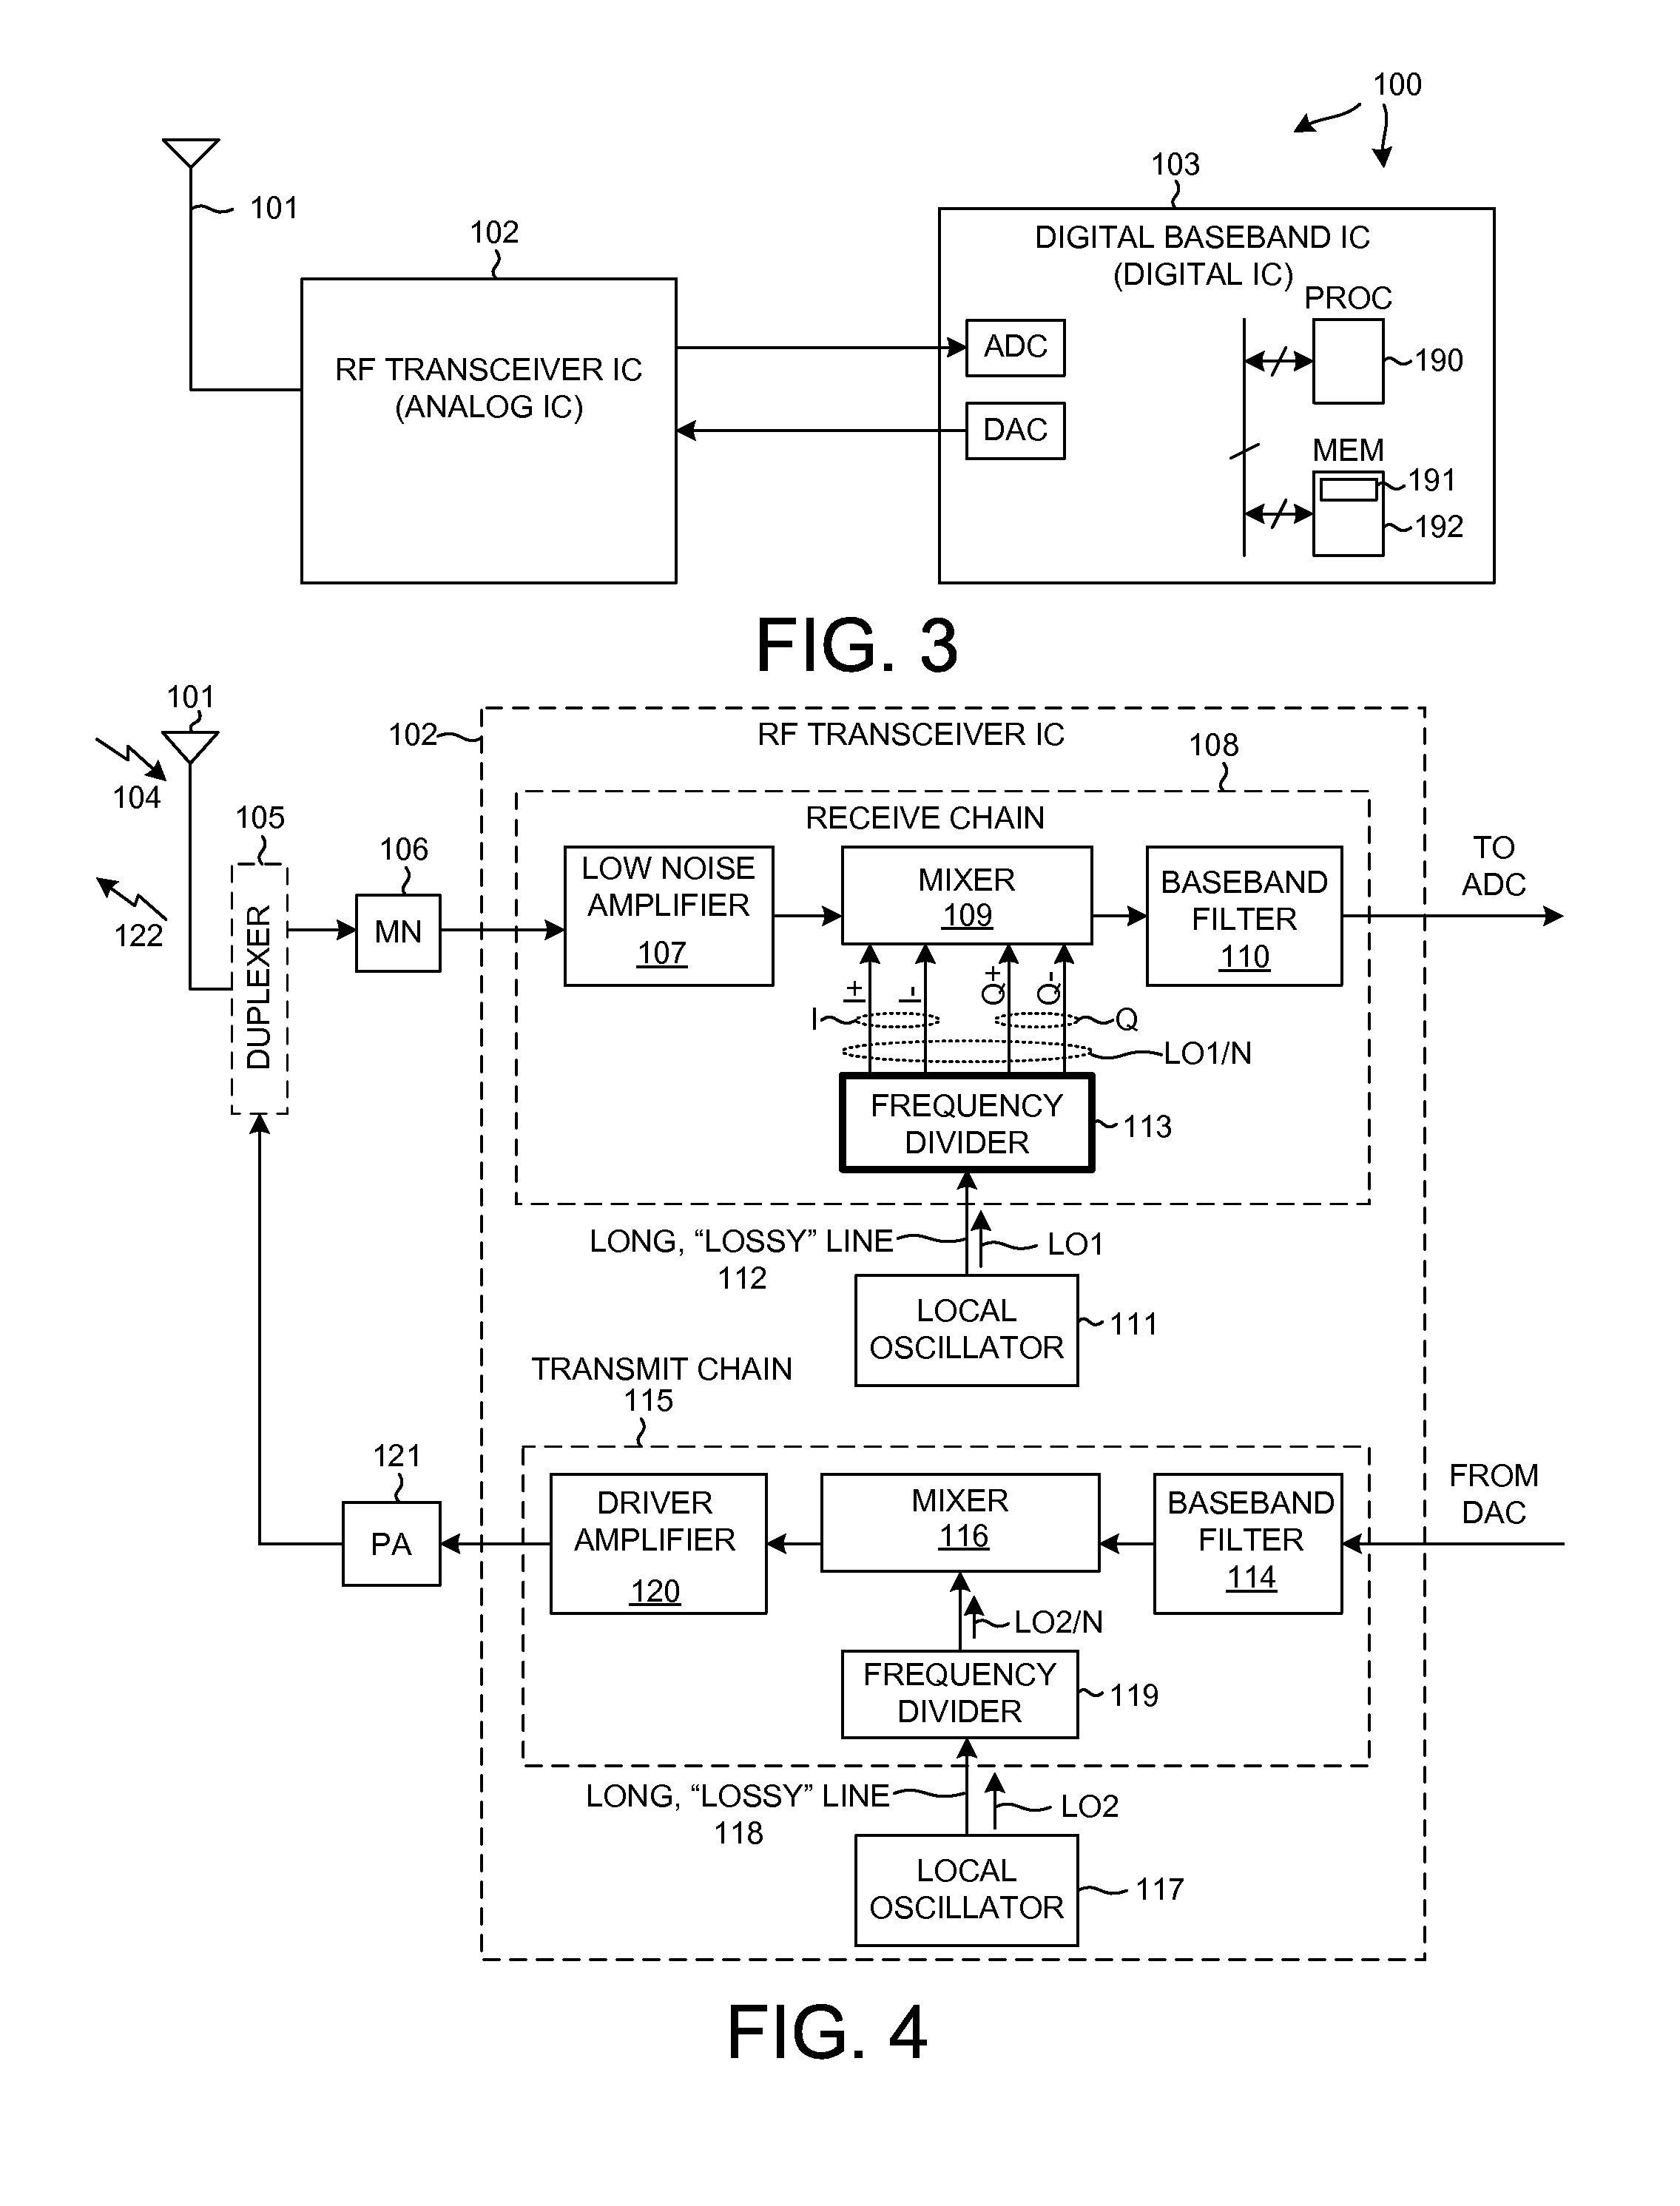 Divide-by-two injection-locked ring oscillator circuit